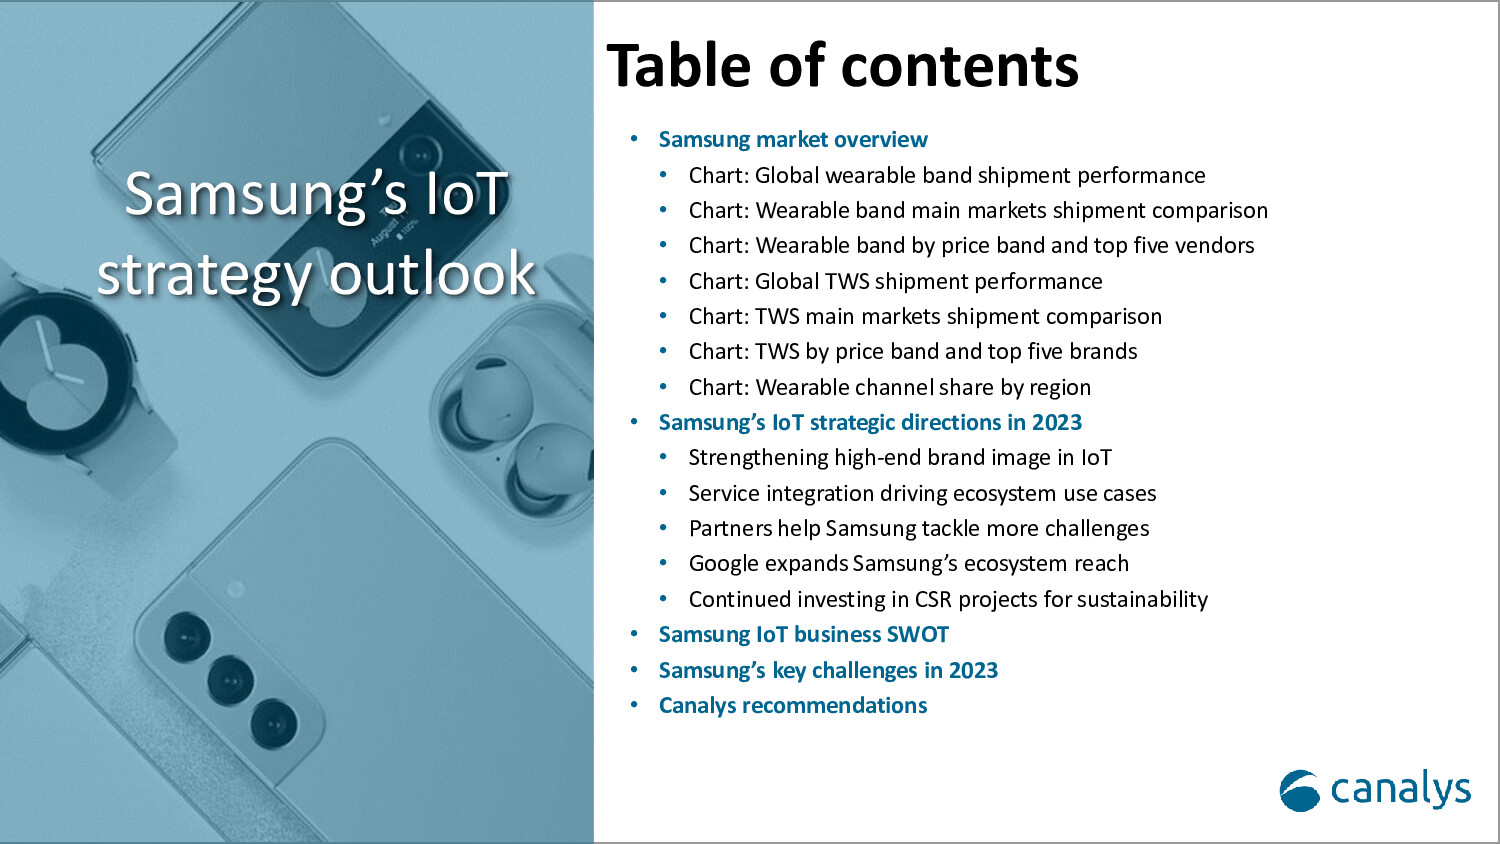 Samsung’s IoT strategy outlook